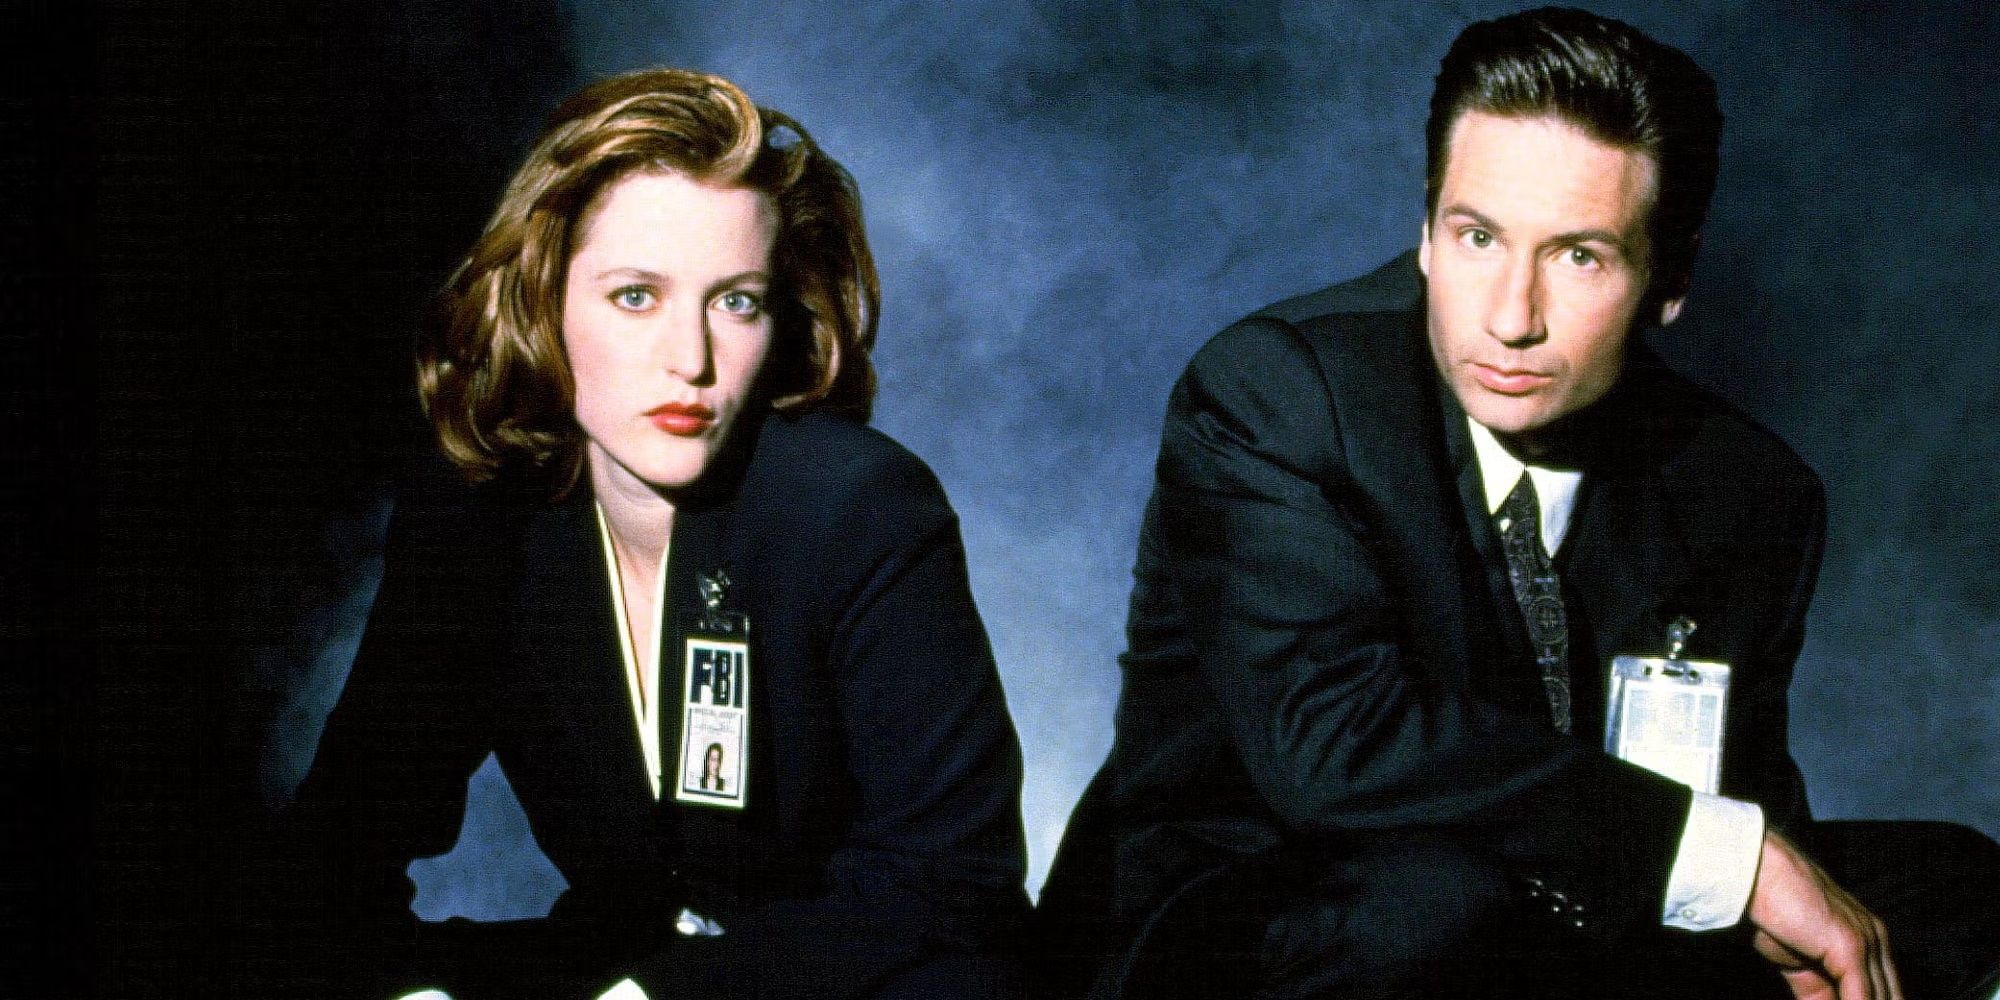 Mulder (Gillian Anderson) and Scully (David Duchovny) kneel in front of a foggy background in a promotional image for The X-Files